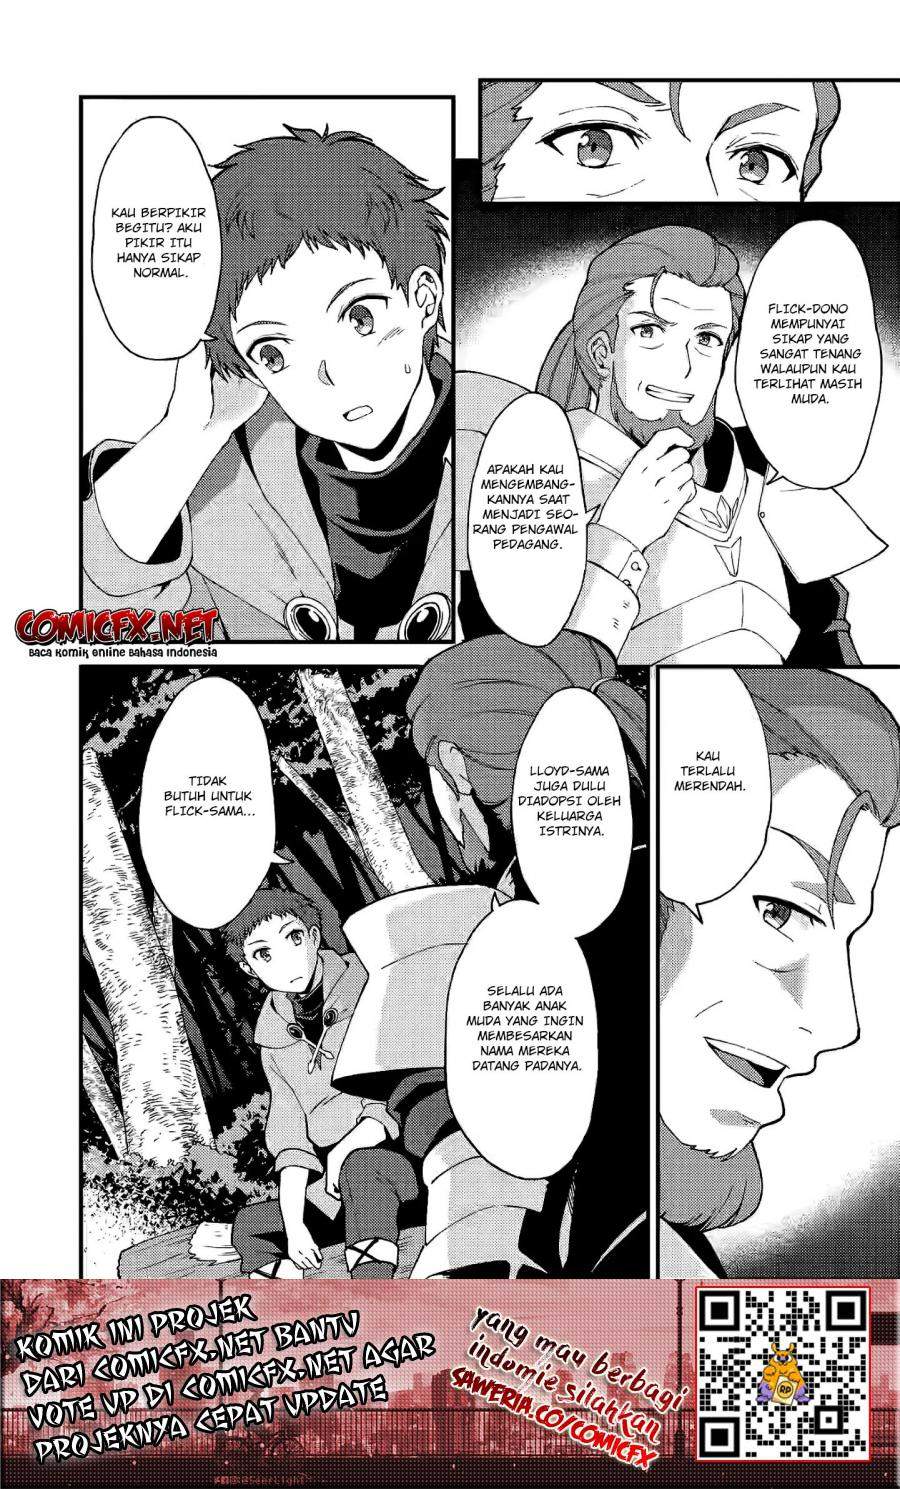 A Sword Master Childhood Friend Power Harassed Me Harshly, So I Broke off Our Relationship and Make a Fresh Start at the Frontier as a Magic Swordsman Chapter 6.2